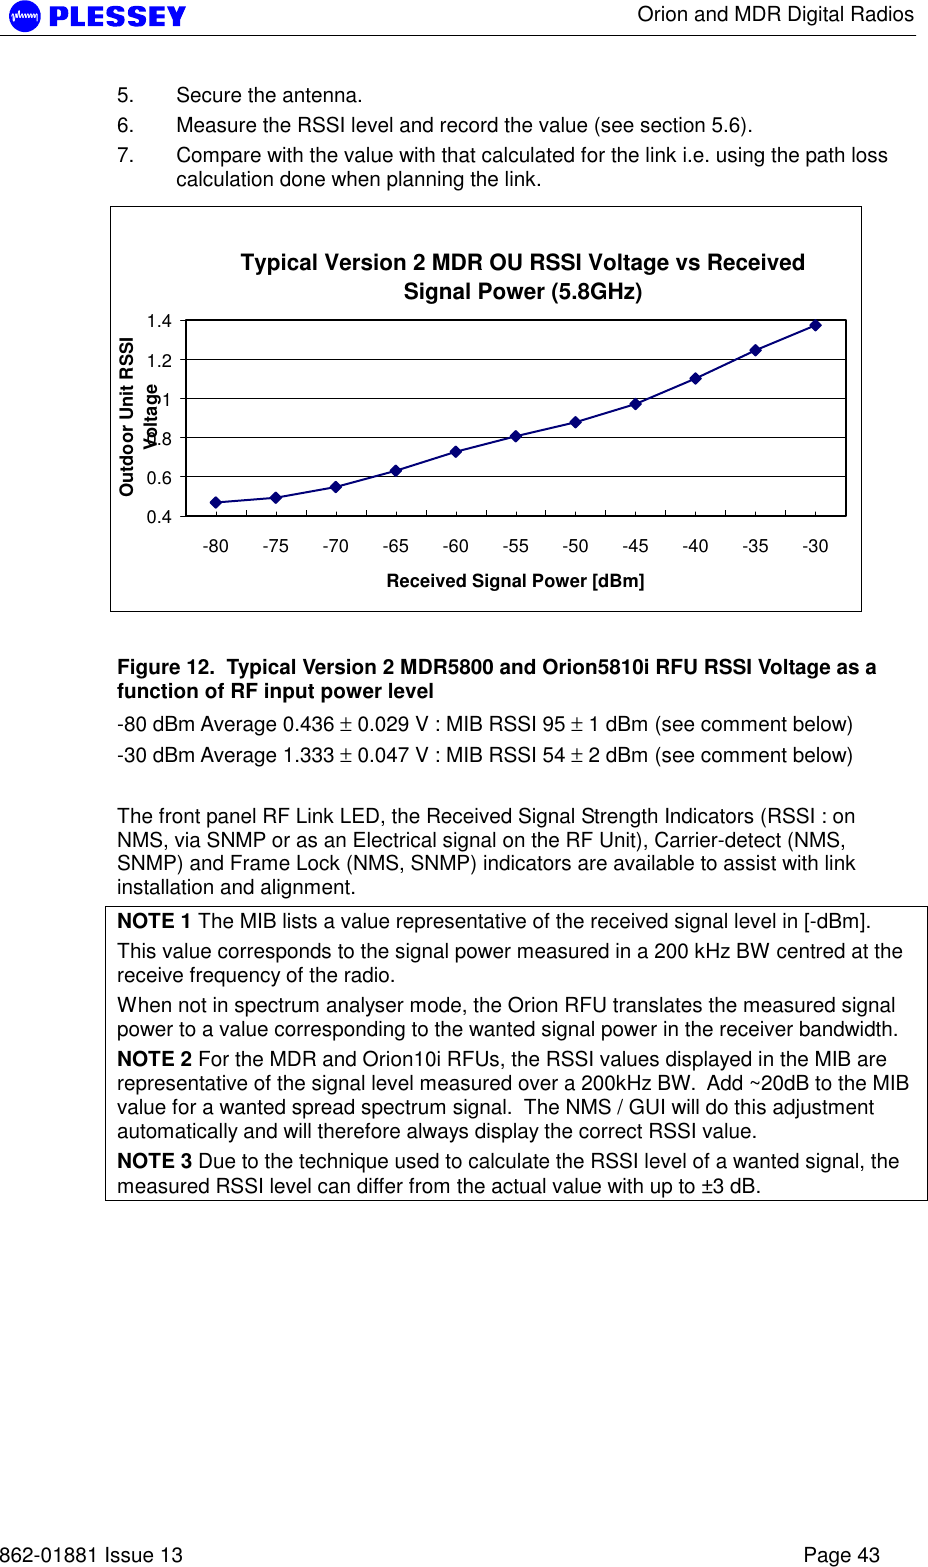      Orion and MDR Digital Radios   862-01881 Issue 13    Page 43 5.  Secure the antenna. 6.  Measure the RSSI level and record the value (see section 5.6). 7.  Compare with the value with that calculated for the link i.e. using the path loss calculation done when planning the link. Typical Version 2 MDR OU RSSI Voltage vs Received Signal Power (5.8GHz)0.40.60.811.21.4-80 -75 -70 -65 -60 -55 -50 -45 -40 -35 -30Received Signal Power [dBm]Outdoor Unit RSSI Voltage  Figure 12.  Typical Version 2 MDR5800 and Orion5810i RFU RSSI Voltage as a function of RF input power level  -80 dBm Average 0.436 ± 0.029 V : MIB RSSI 95 ± 1 dBm (see comment below) -30 dBm Average 1.333 ± 0.047 V : MIB RSSI 54 ± 2 dBm (see comment below)  The front panel RF Link LED, the Received Signal Strength Indicators (RSSI : on NMS, via SNMP or as an Electrical signal on the RF Unit), Carrier-detect (NMS, SNMP) and Frame Lock (NMS, SNMP) indicators are available to assist with link installation and alignment.  NOTE 1 The MIB lists a value representative of the received signal level in [-dBm].   This value corresponds to the signal power measured in a 200 kHz BW centred at the receive frequency of the radio. When not in spectrum analyser mode, the Orion RFU translates the measured signal power to a value corresponding to the wanted signal power in the receiver bandwidth.  NOTE 2 For the MDR and Orion10i RFUs, the RSSI values displayed in the MIB are representative of the signal level measured over a 200kHz BW.  Add ~20dB to the MIB value for a wanted spread spectrum signal.  The NMS / GUI will do this adjustment automatically and will therefore always display the correct RSSI value. NOTE 3 Due to the technique used to calculate the RSSI level of a wanted signal, the measured RSSI level can differ from the actual value with up to ±3 dB.  